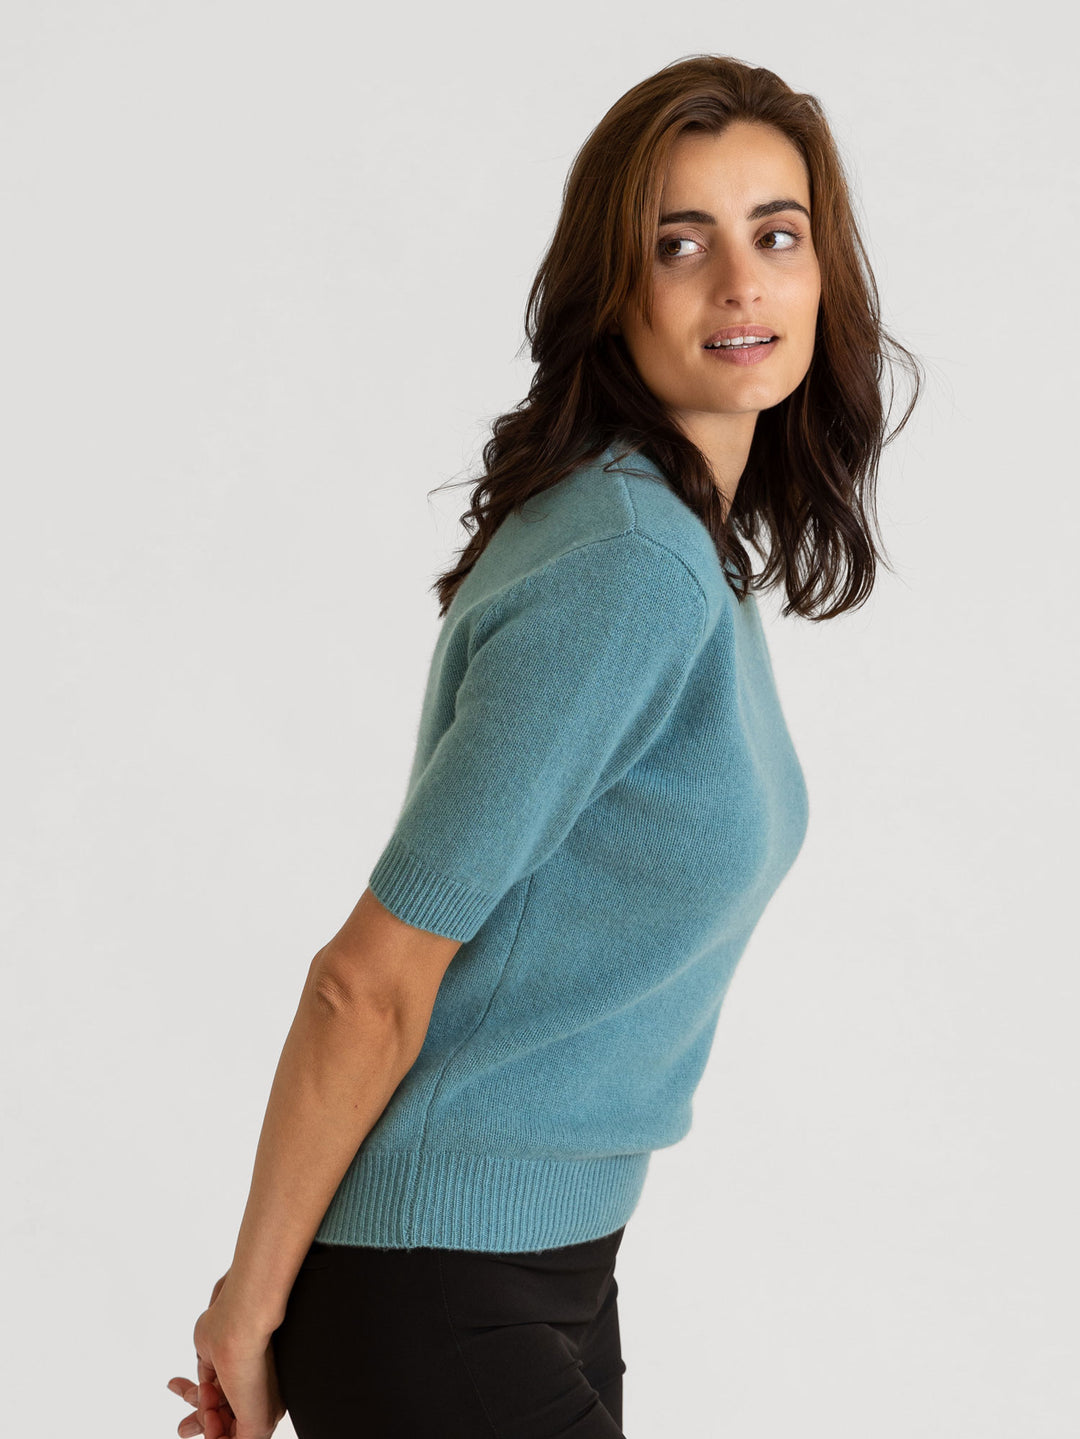 Short sleeved cashmere sweater from Kashmina 100% pure cashmere. Color, arctic blue turquoise.